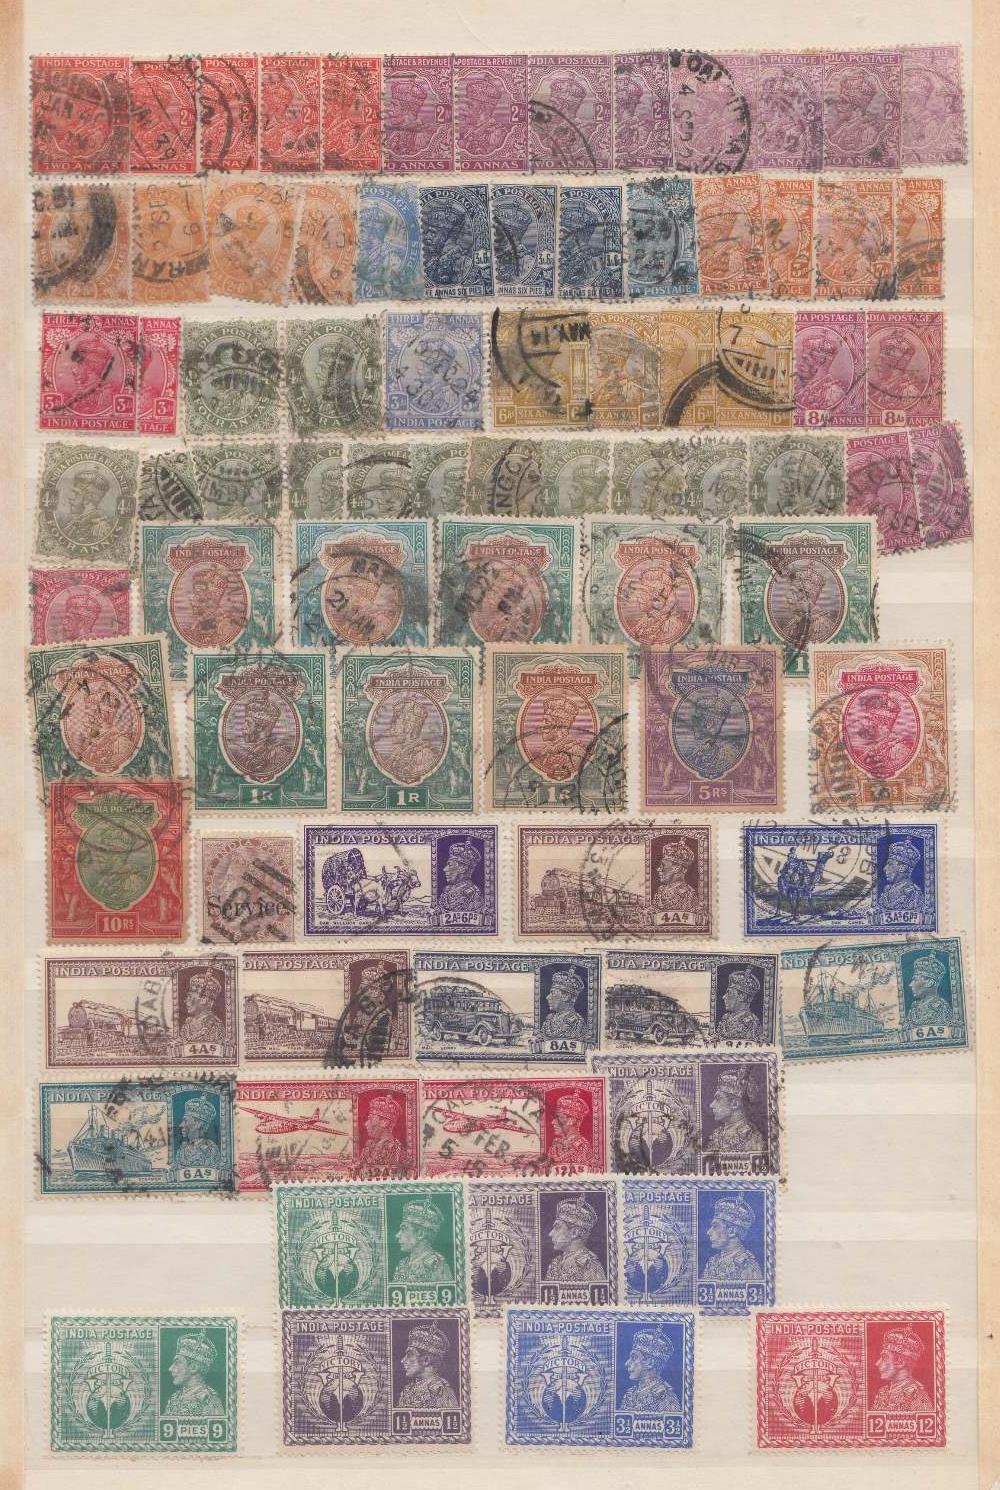 STAMPS BRITISH COMMONWEALTH mainly used in blue stockbook, Malaya, Singapore, Norfolk Islands, - Image 2 of 3